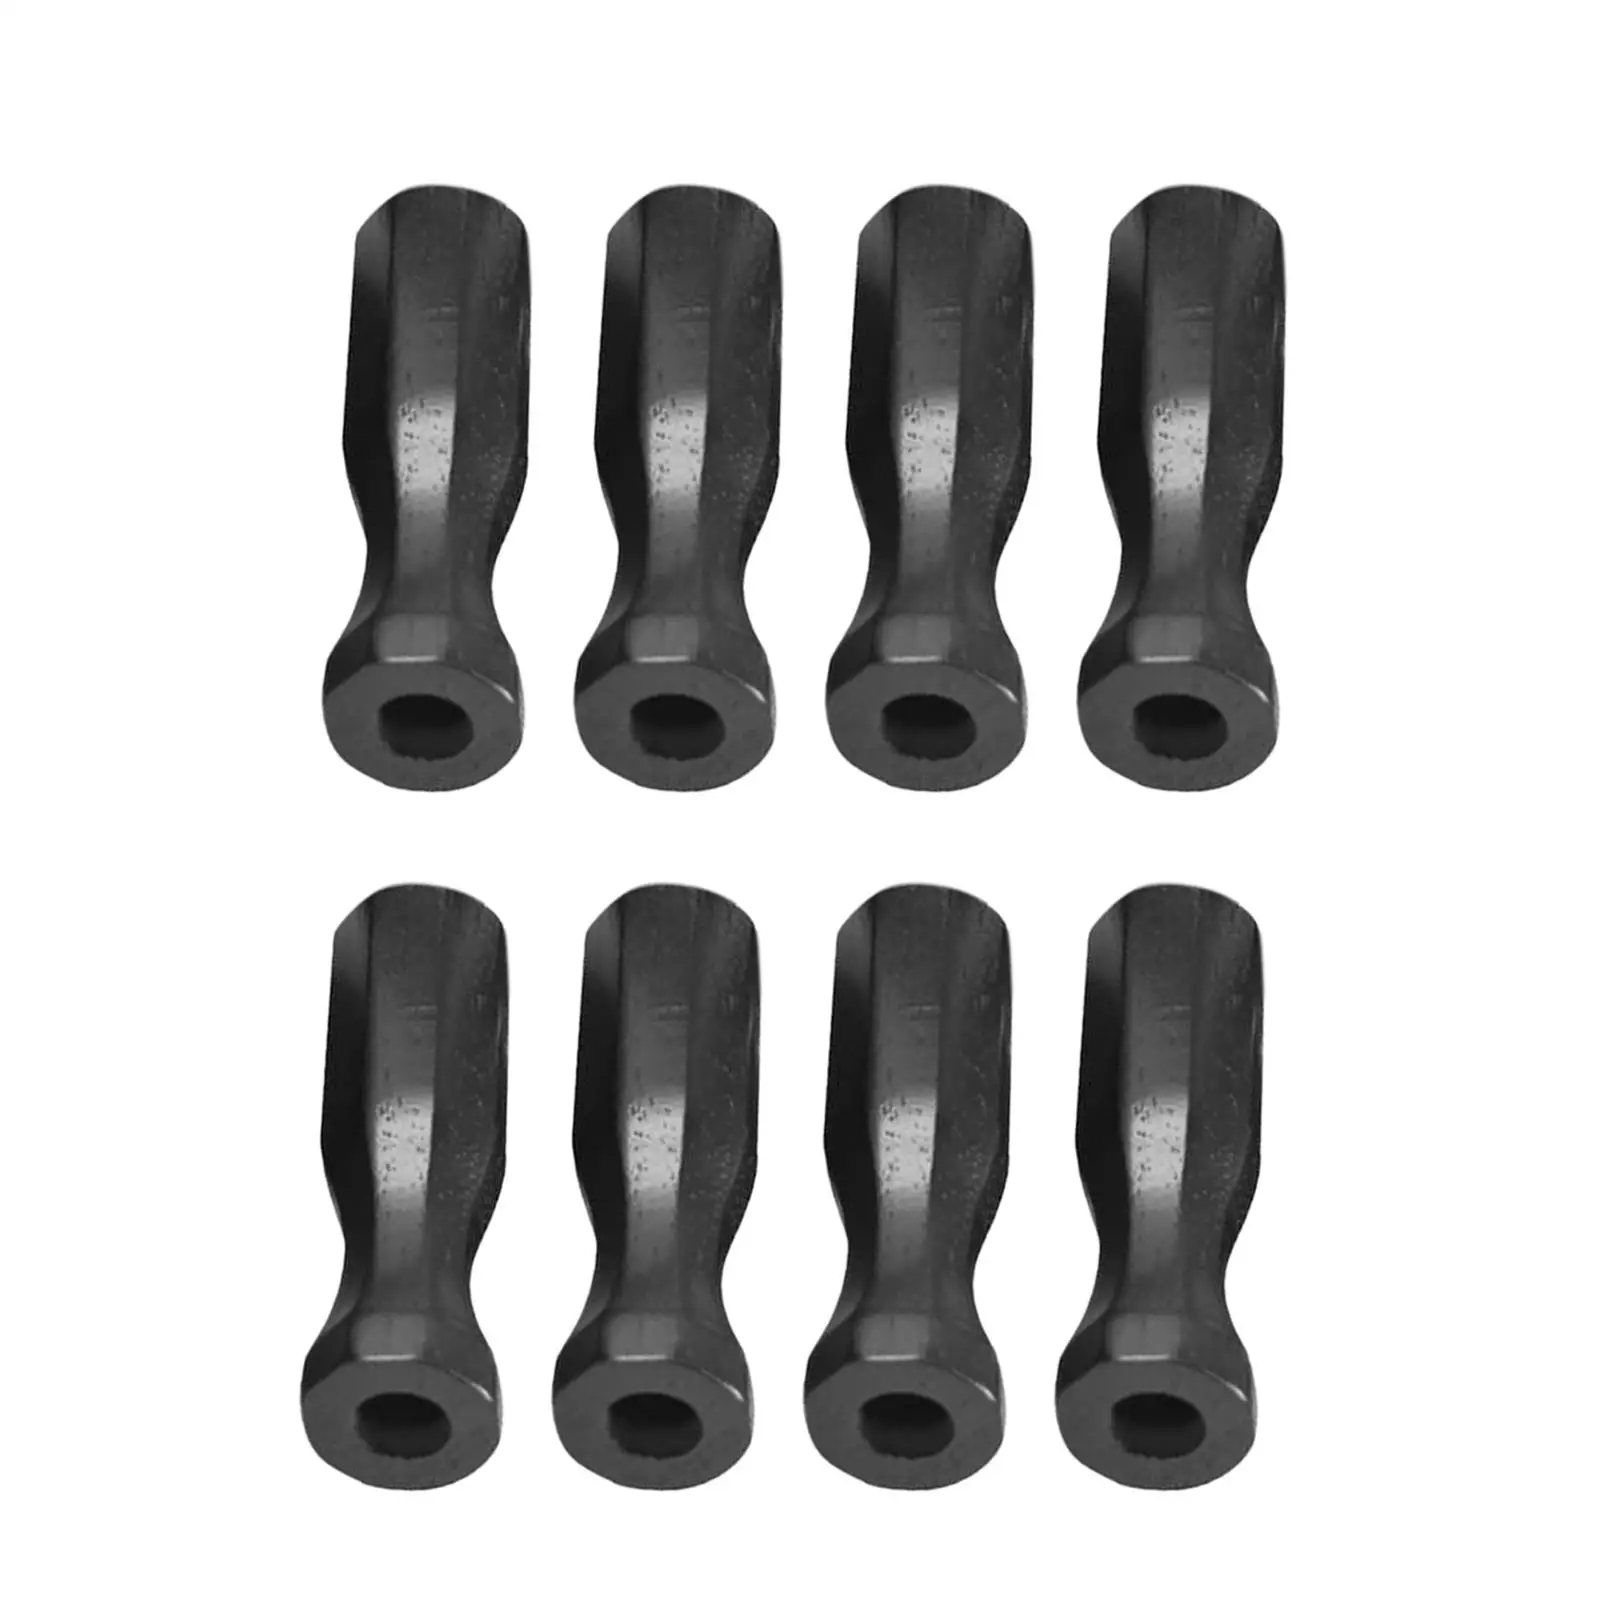 8x Soccer Table Handles Accessory Wooden Foosball Handle Rod Replacements